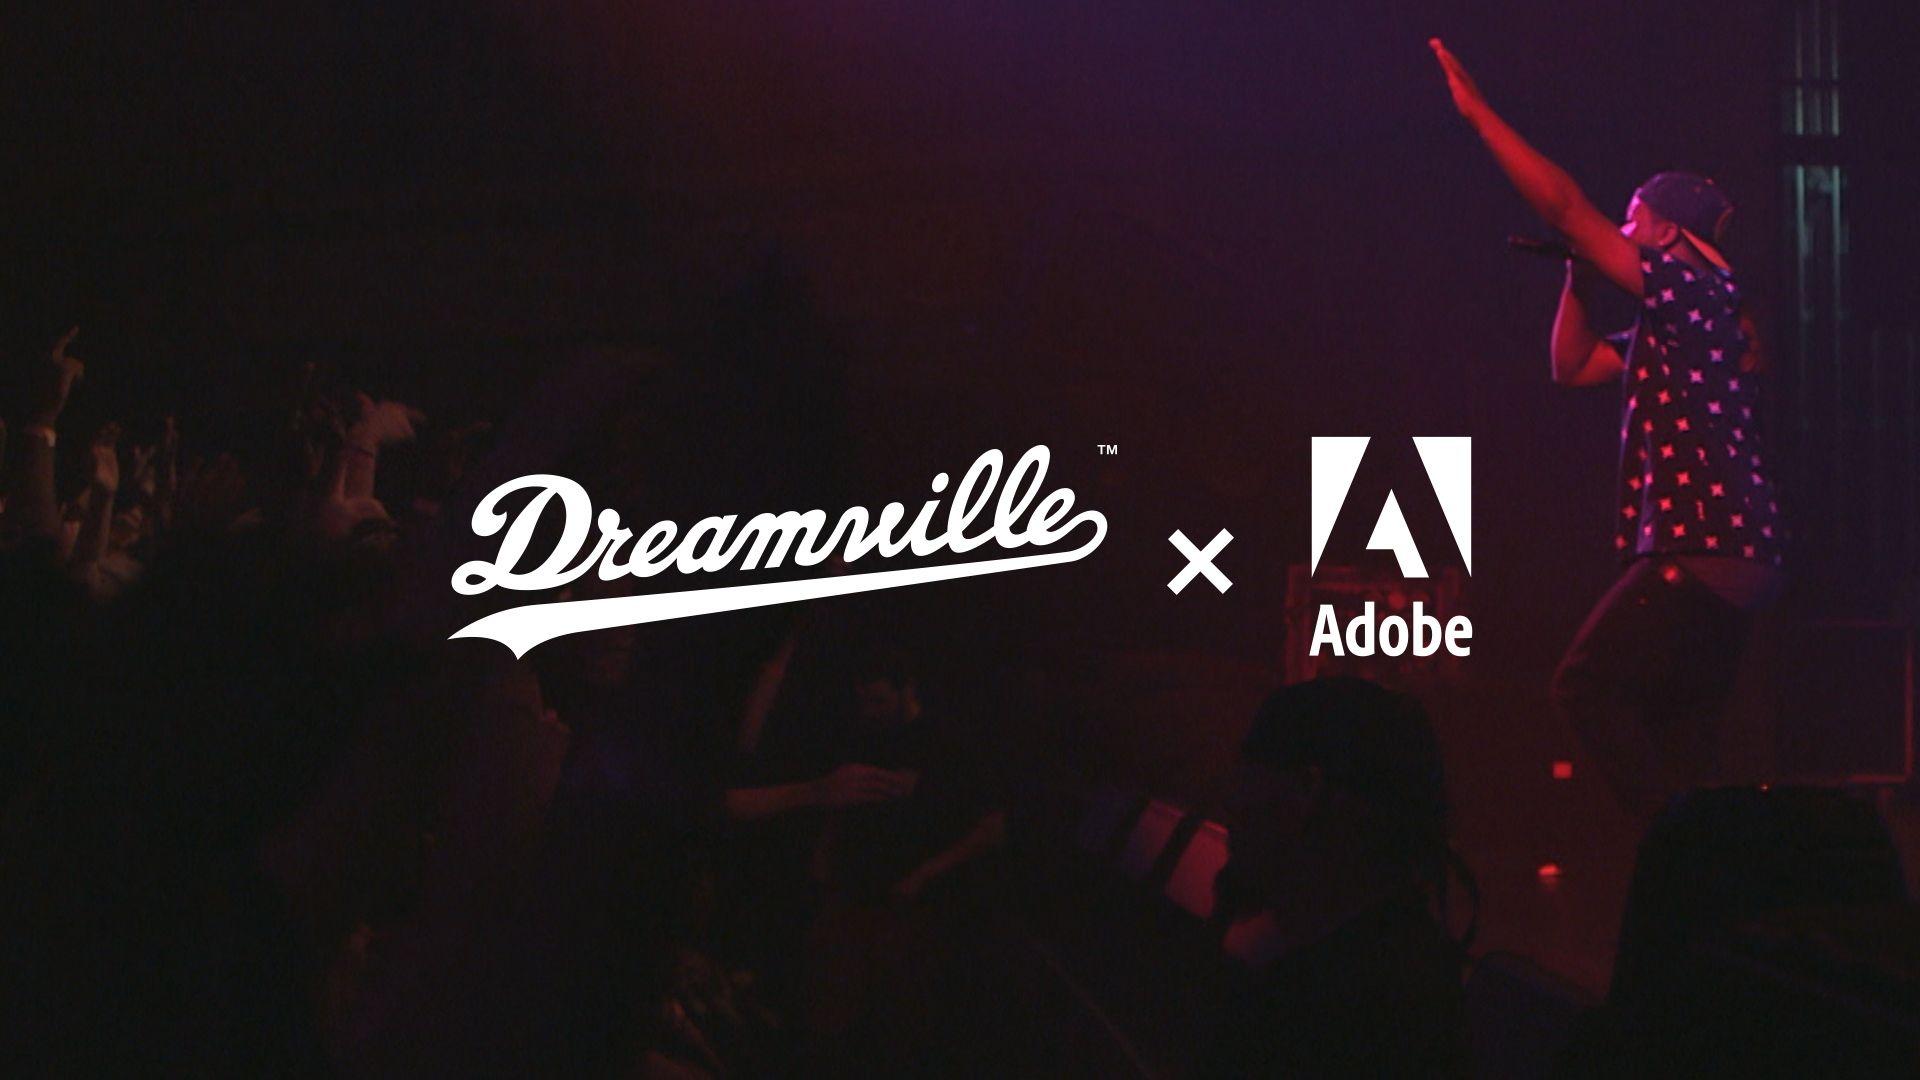 Dreamville x Adobe: Behind The Forest Hills Drive Tour